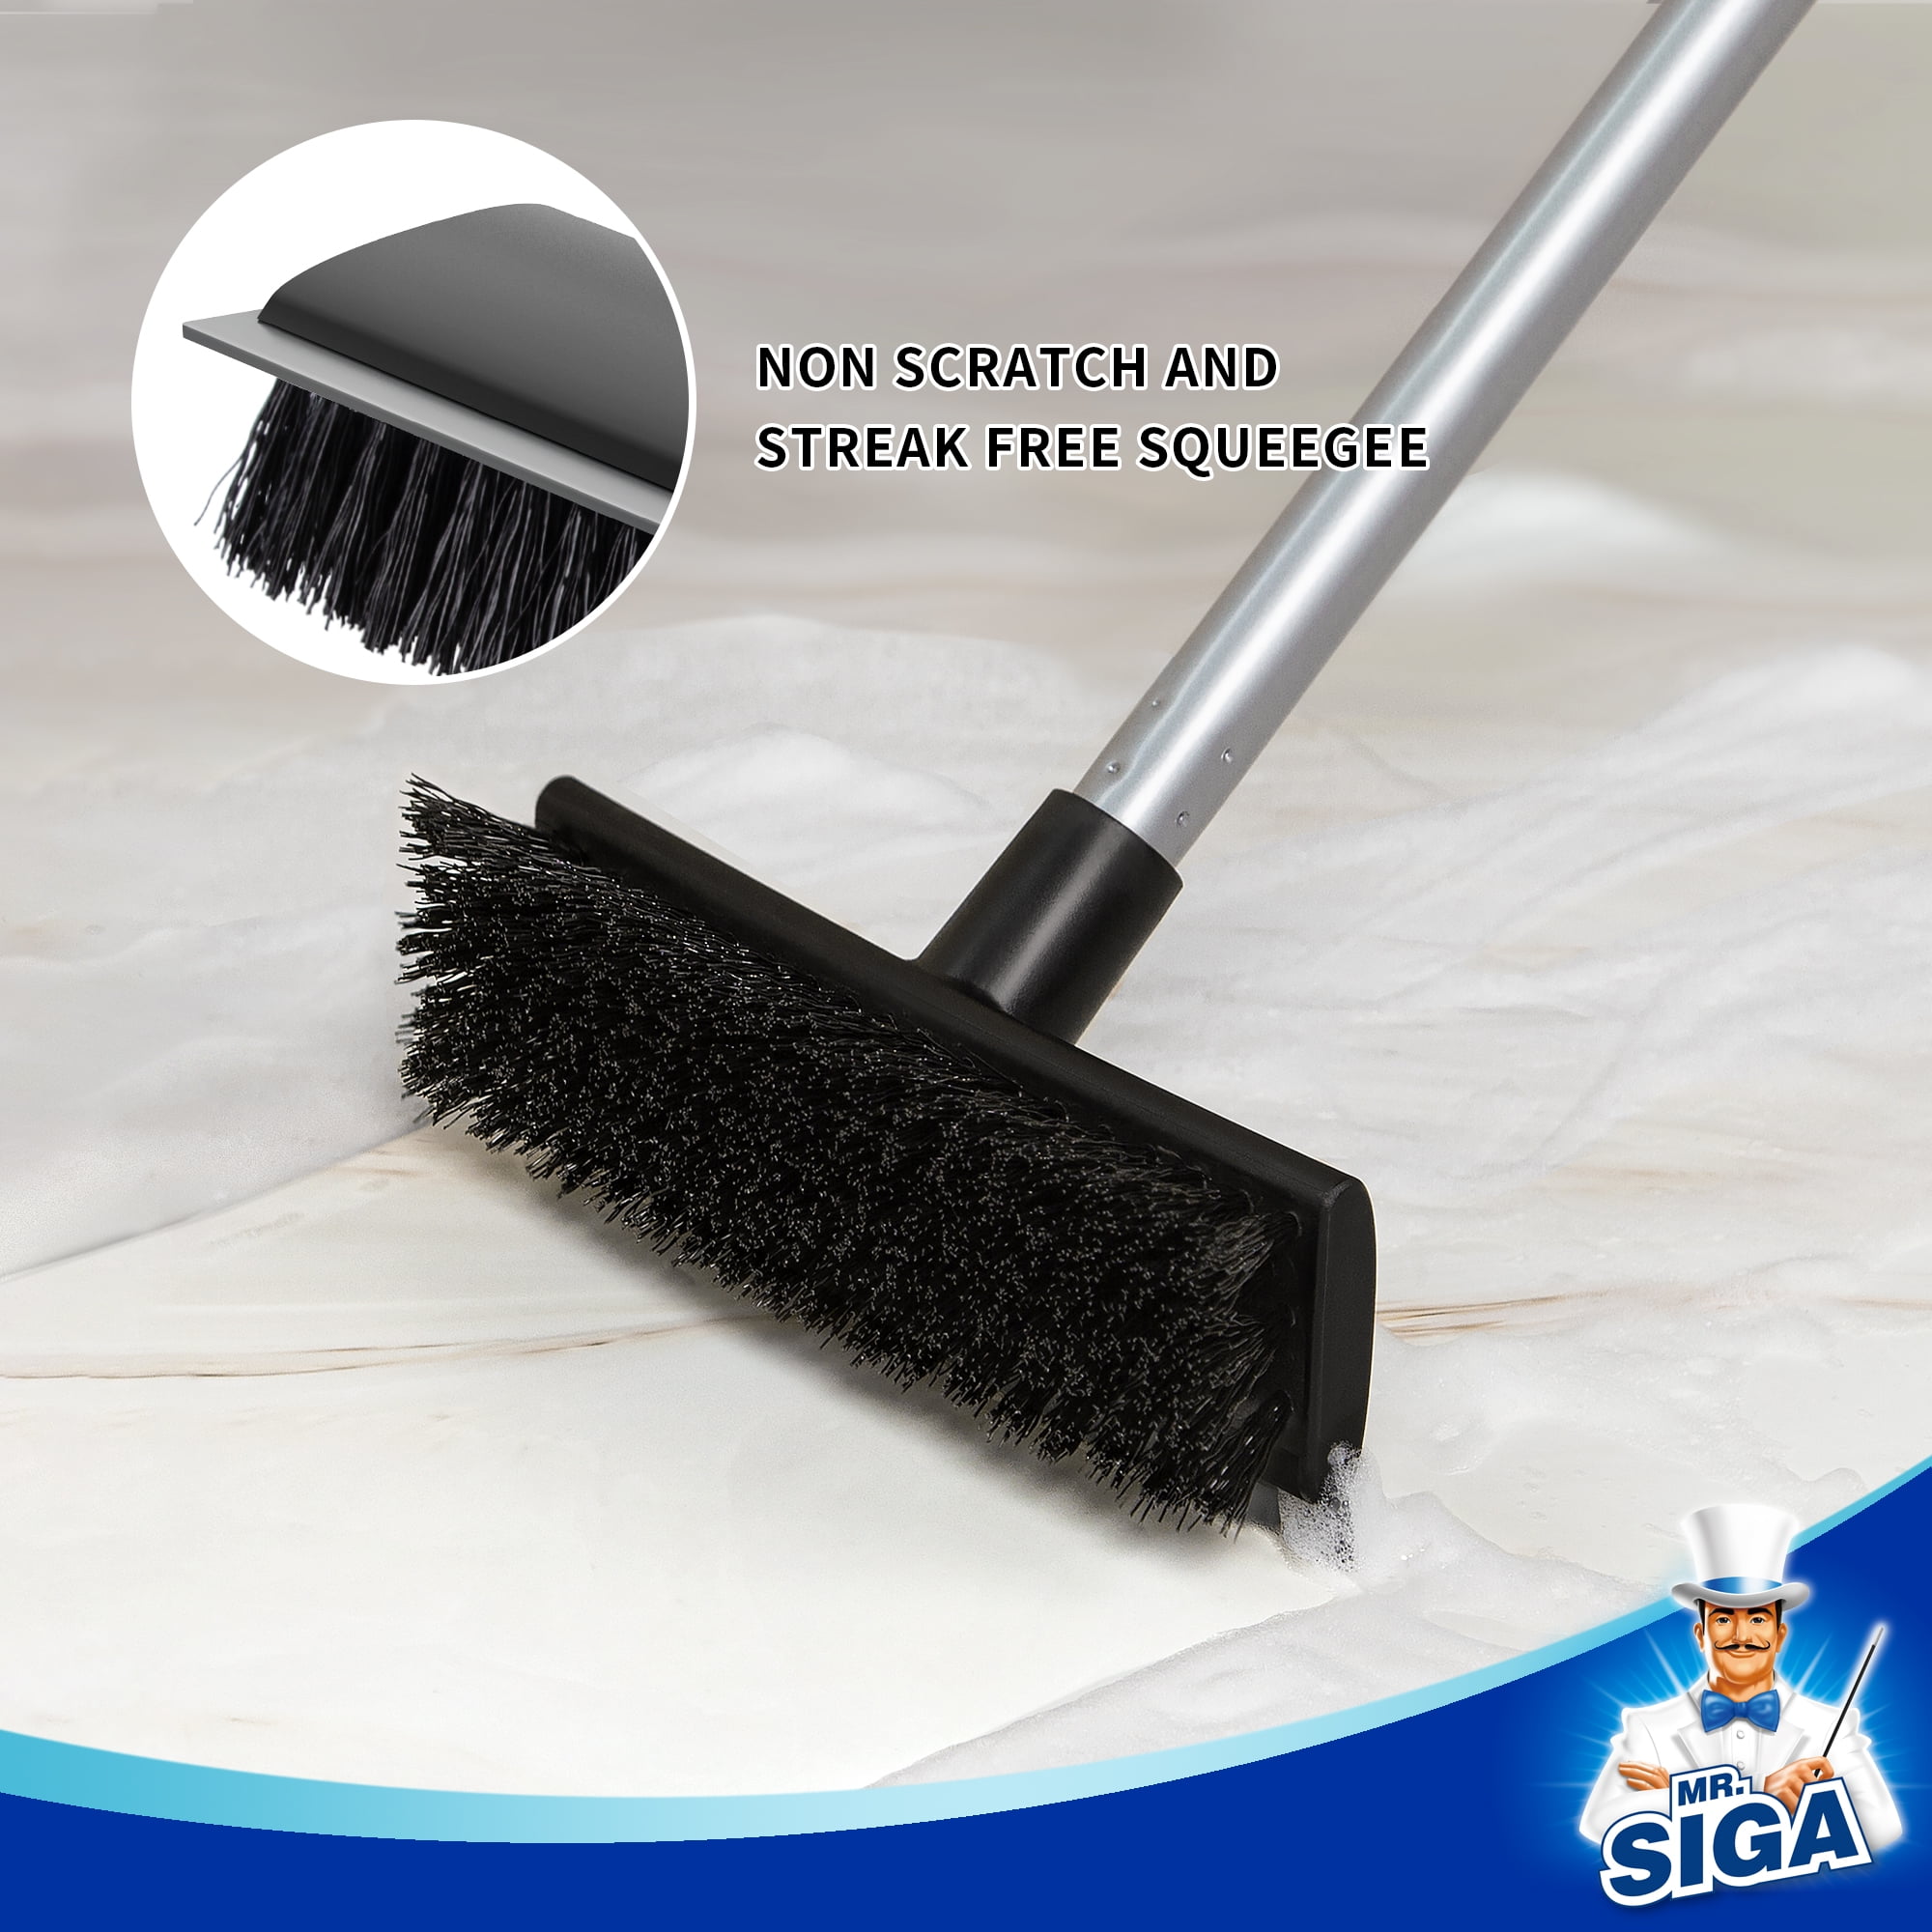 A1350-002 Squeegee with Scrubbing Brush - Steamfast